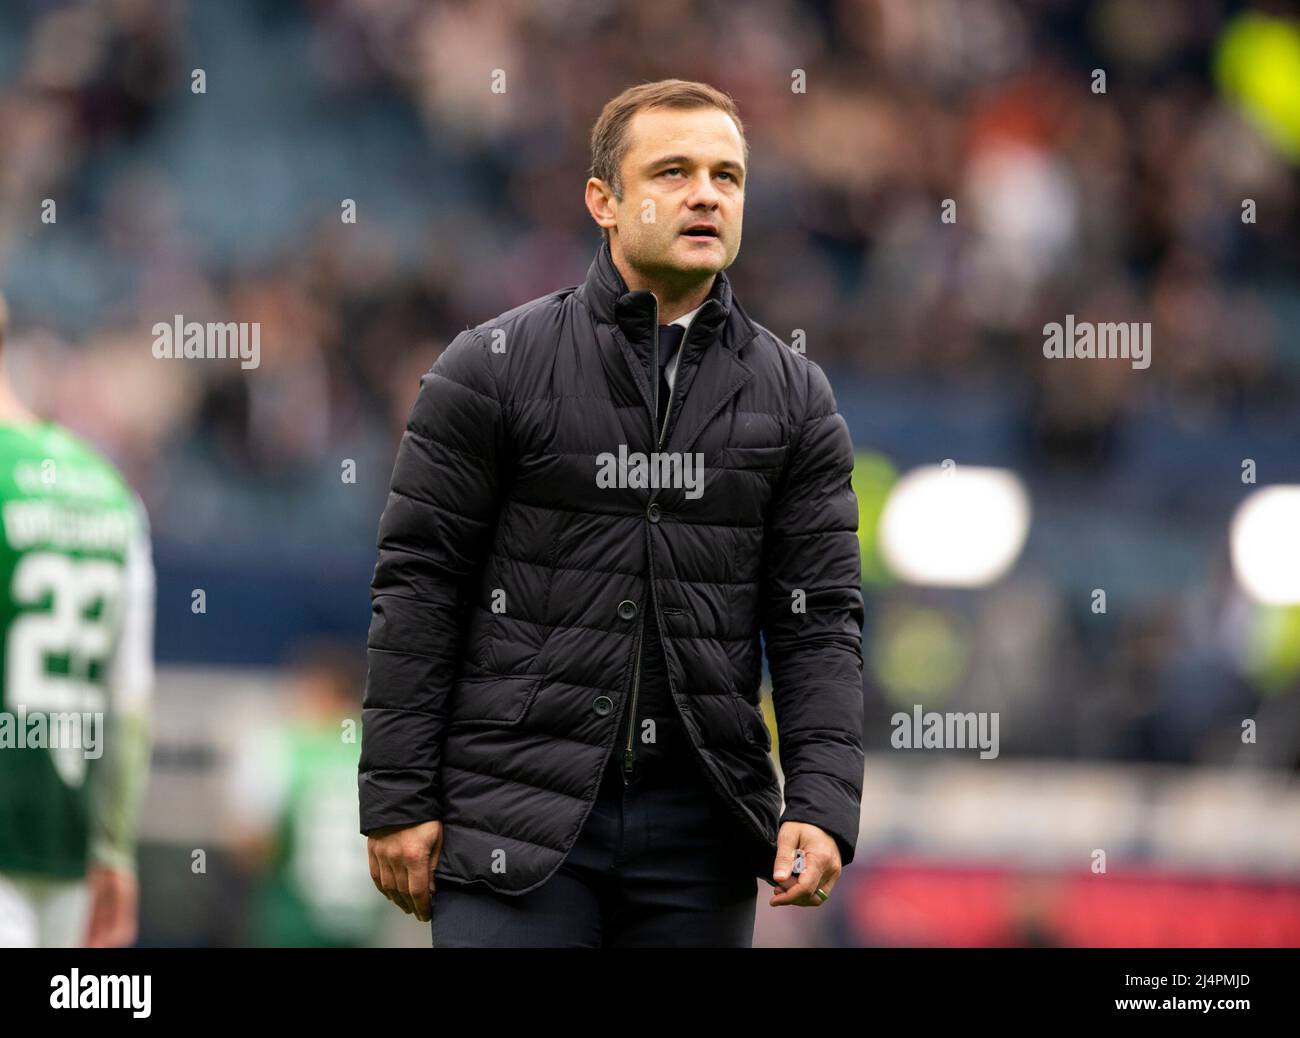 Glasgow, UK. 16th Apr, 2022. Scottish Cup Semi-Final - Heart of Midlothian FC v Hibernian FC 16/04/2022 Pic shows: A resigned HibsÕ Manager, Shaun Maloney, at the final whistle as 2 first half goals by Ellis Simms and Stephen Kingsley were enough to get Hearts to the final as Hearts beat Hibs 2-1 Hibs in the Scottish Cup semi final at Hampden Park, Glasgow Credit: Ian Jacobs/Alamy Live News Stock Photo